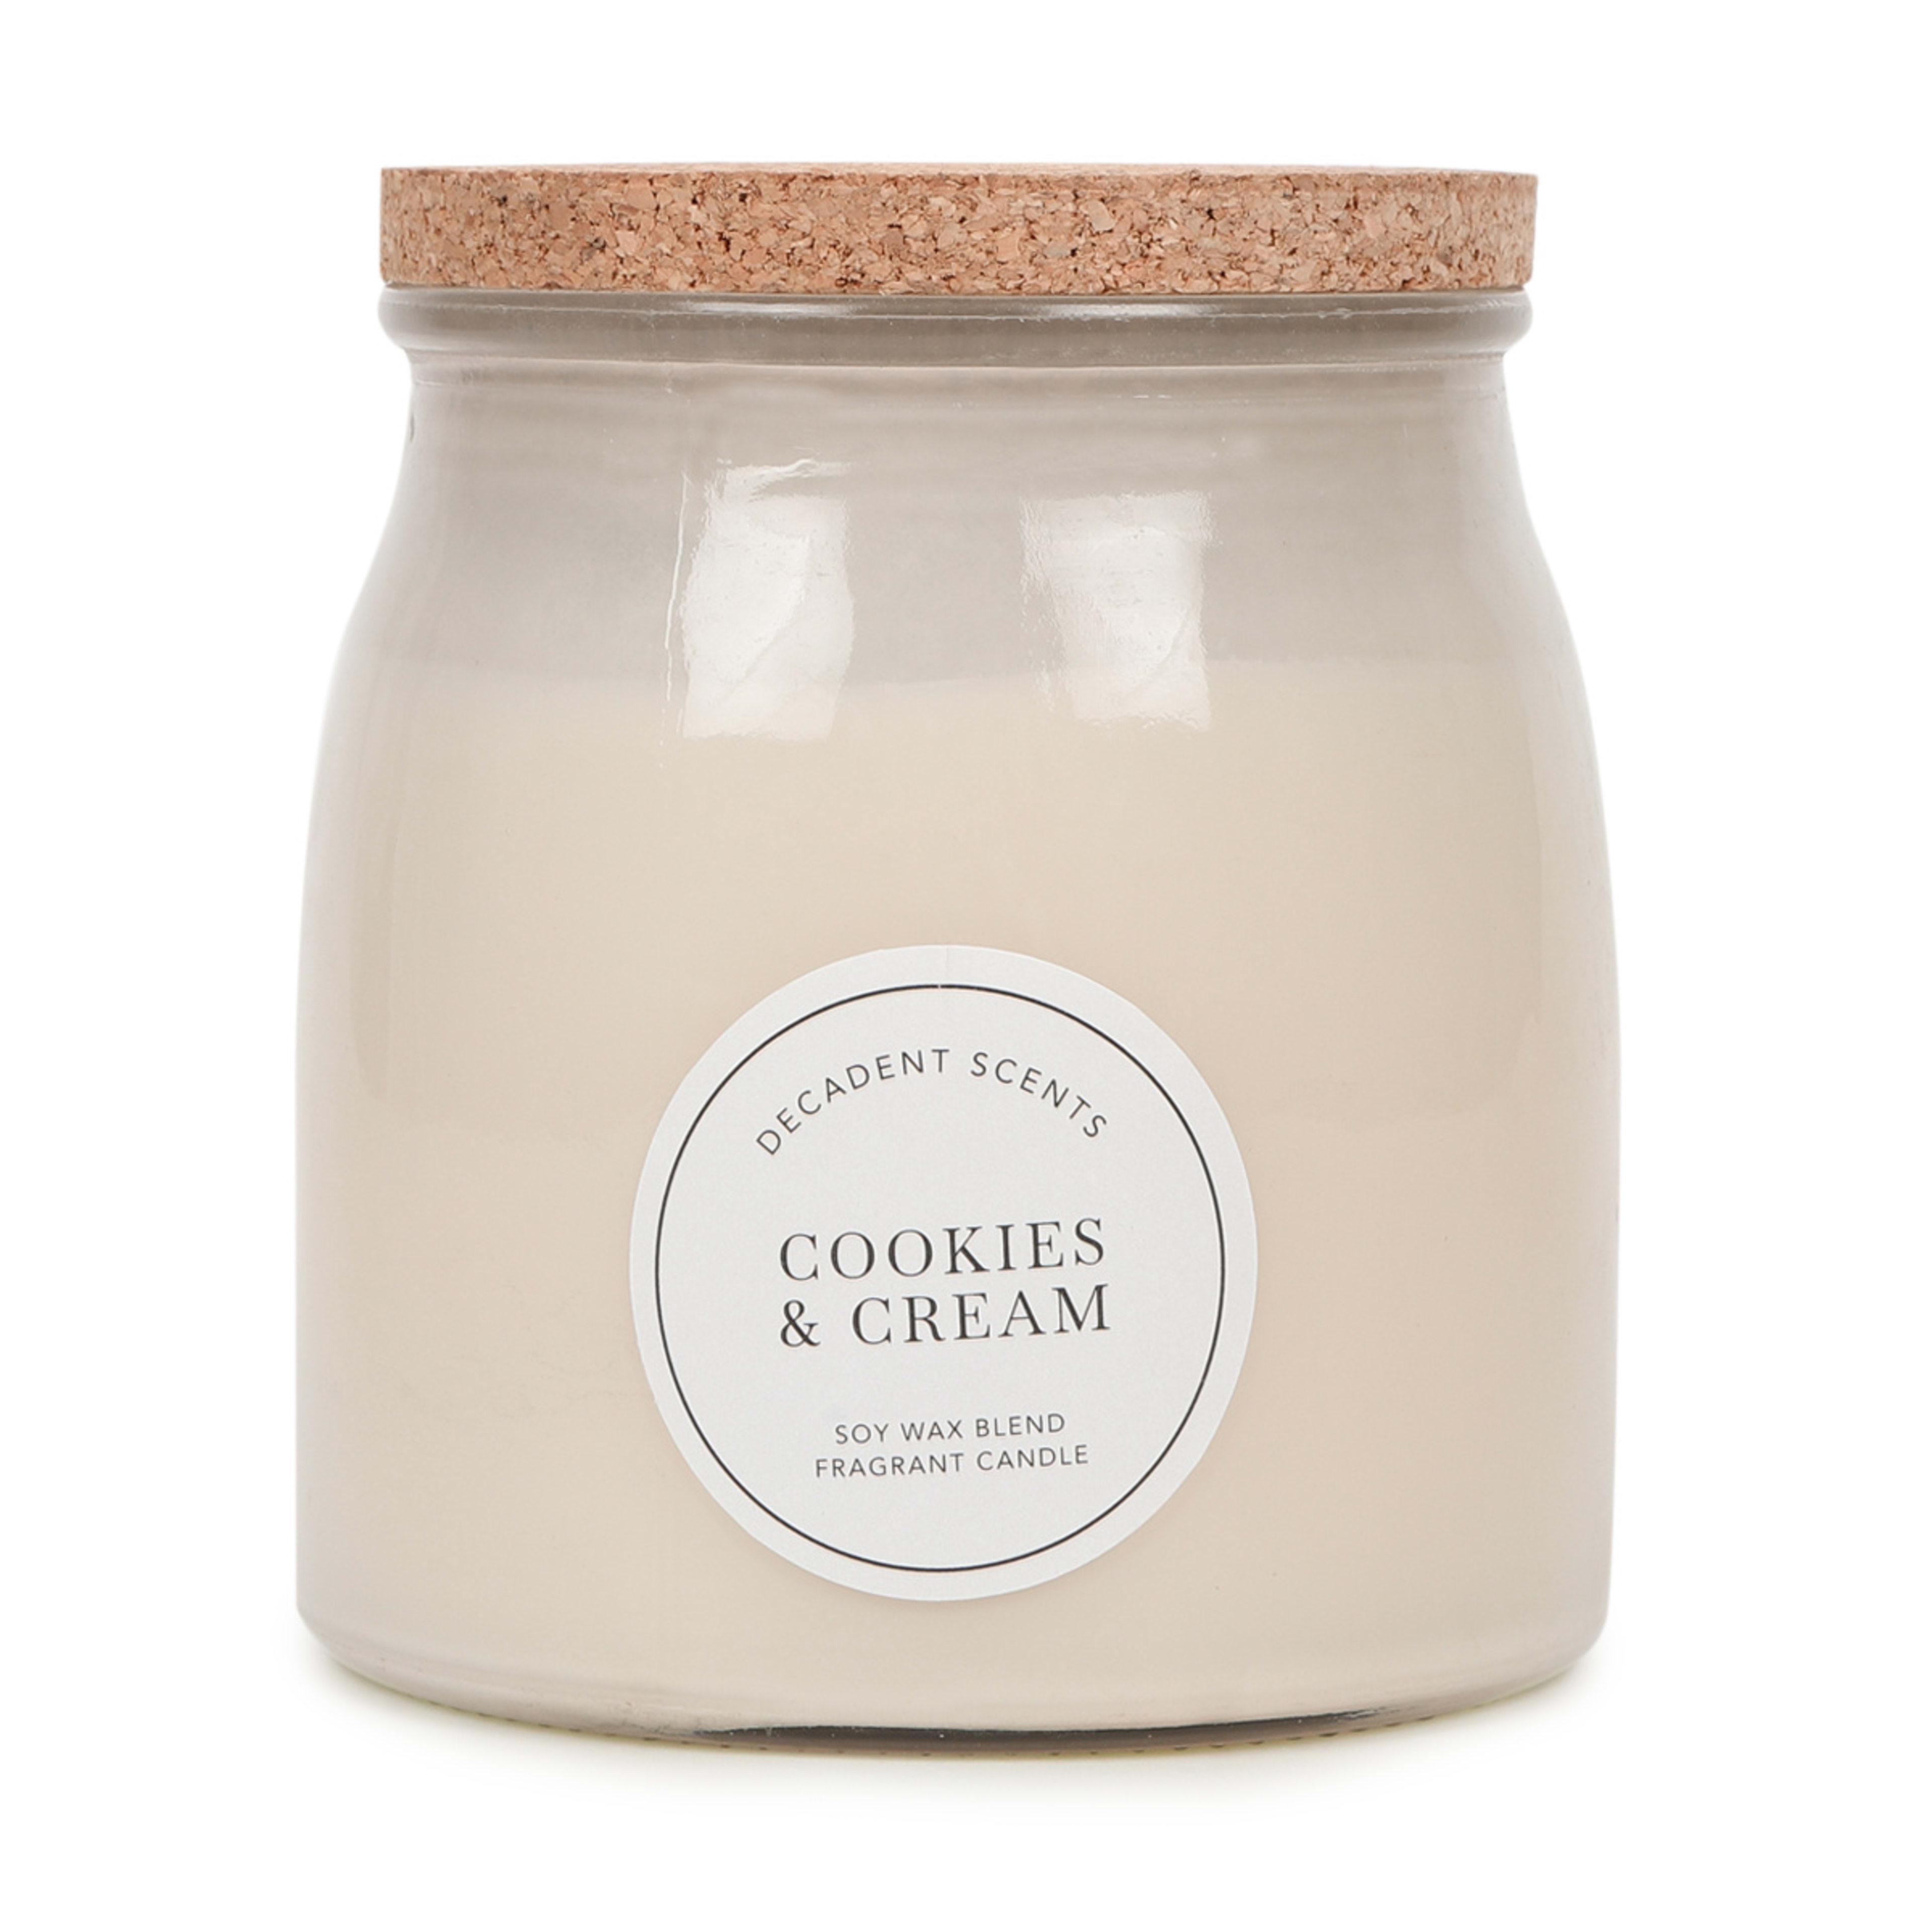 Cookies and Cream Decadent Scents Soy Wax Blend Fragrant Candle